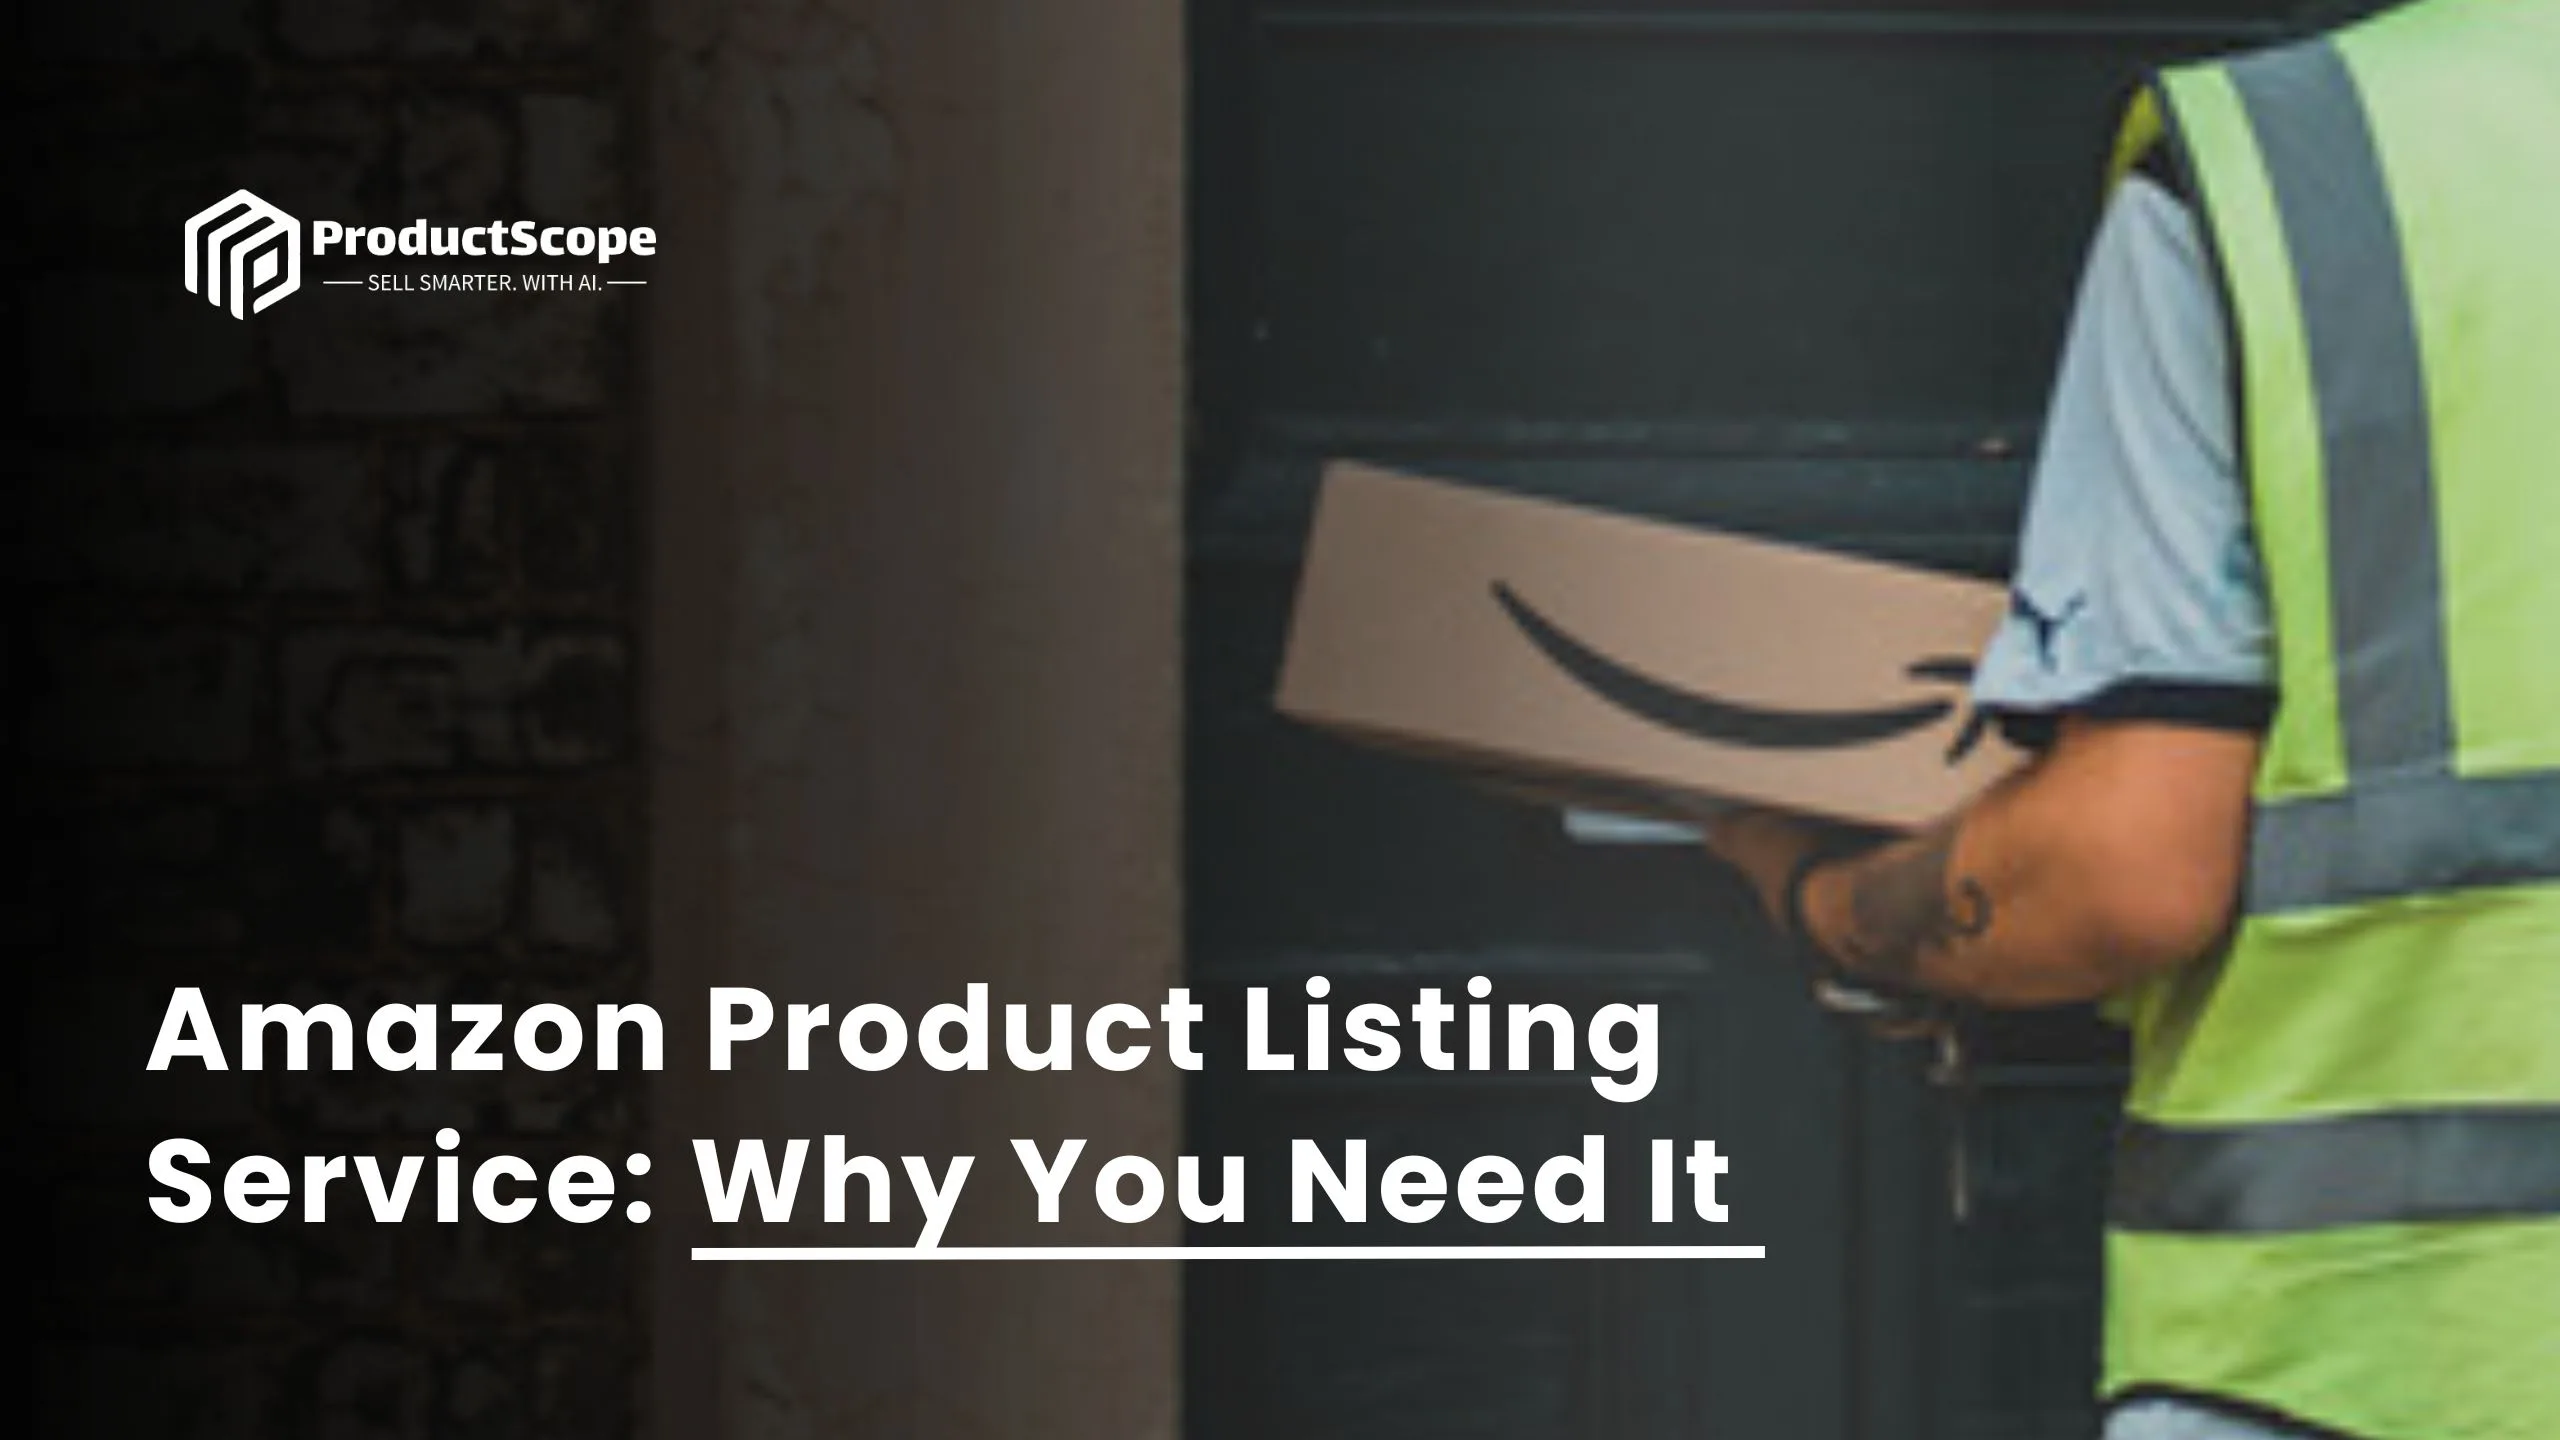 Amazon Product Listing Service: Why You Need It